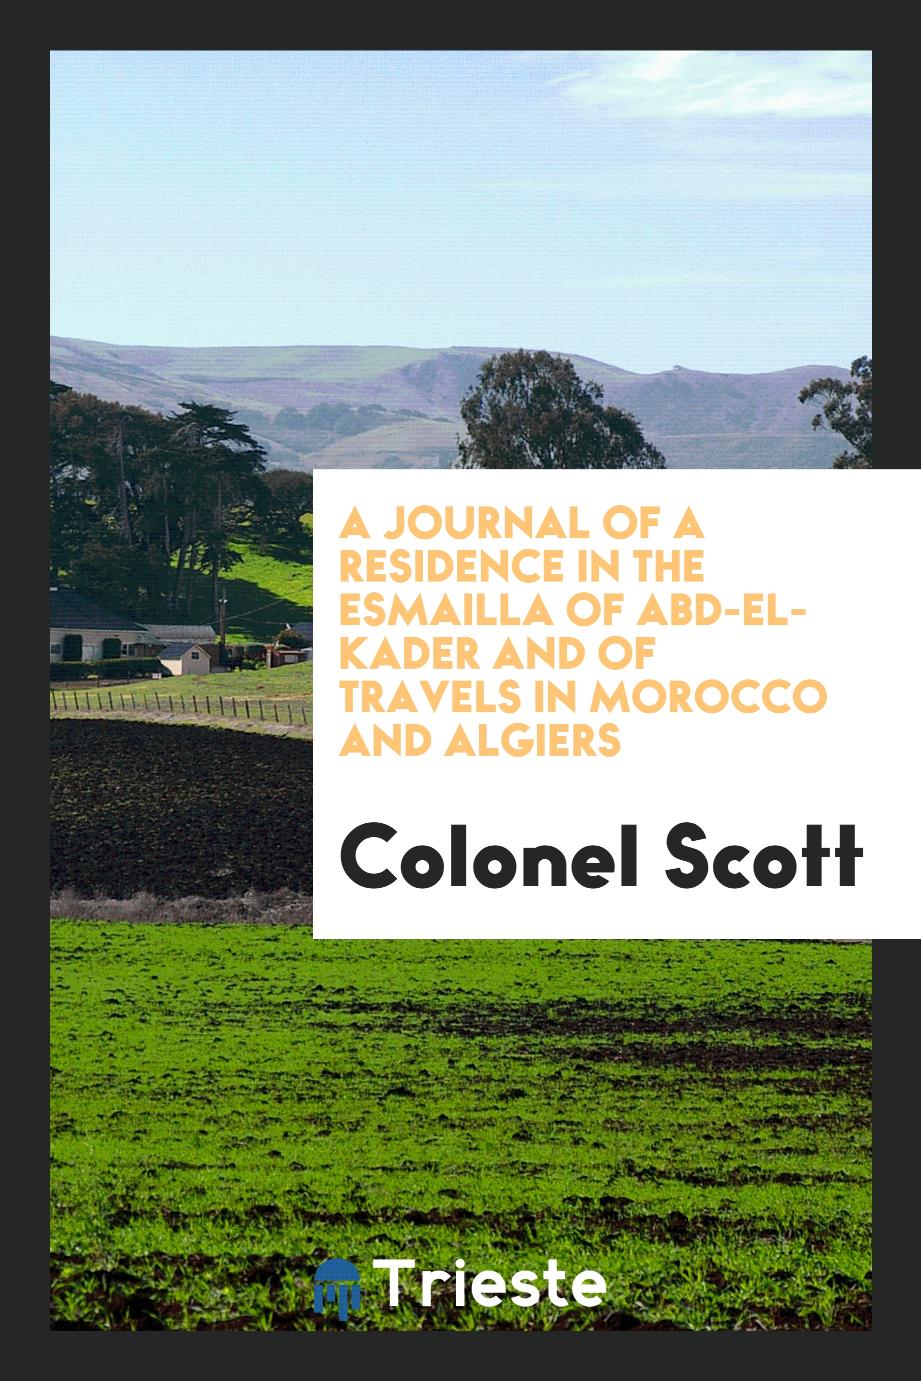 A journal of a residence in the Esmailla of Abd-el-Kader and of travels in Morocco and Algiers